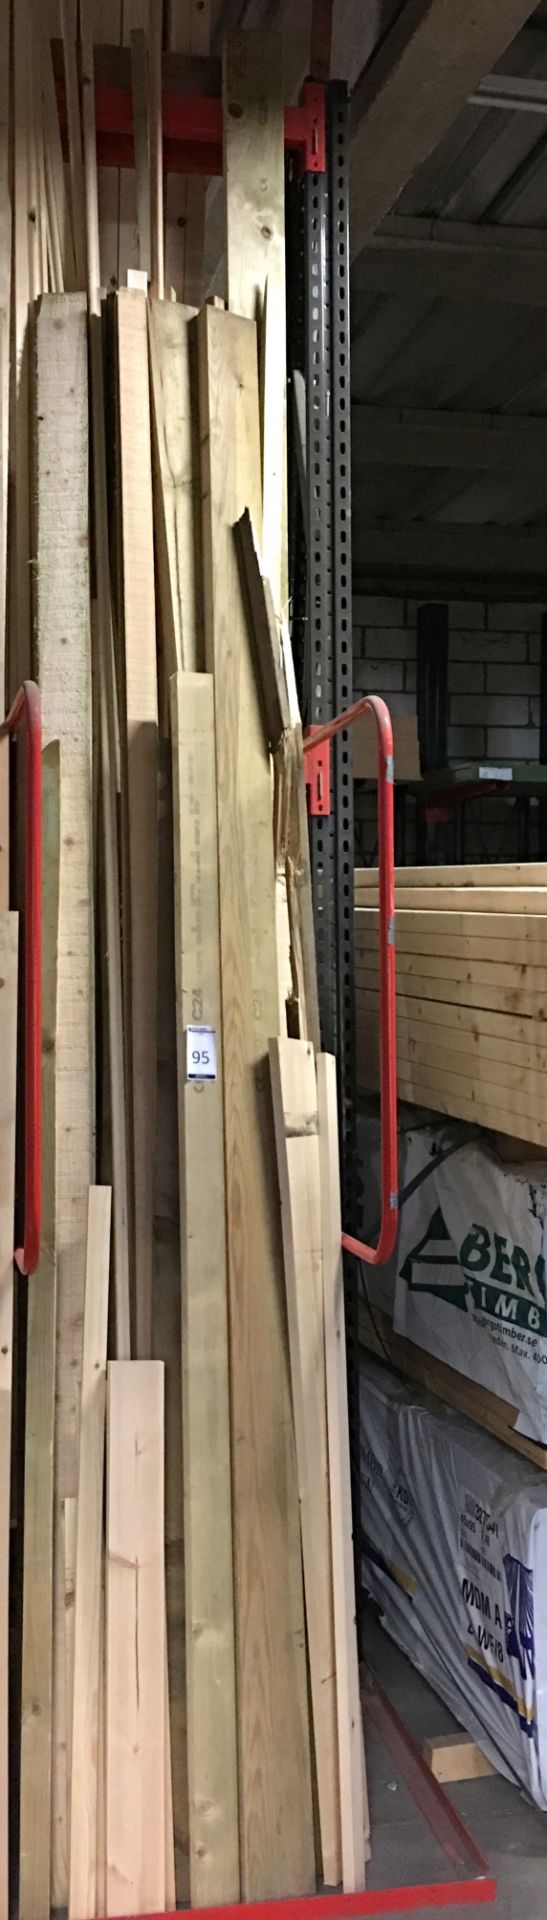 Wood Lengths, Various Dimensions (Contents of Single Divider) (located at Tooting, viewing Tuesday